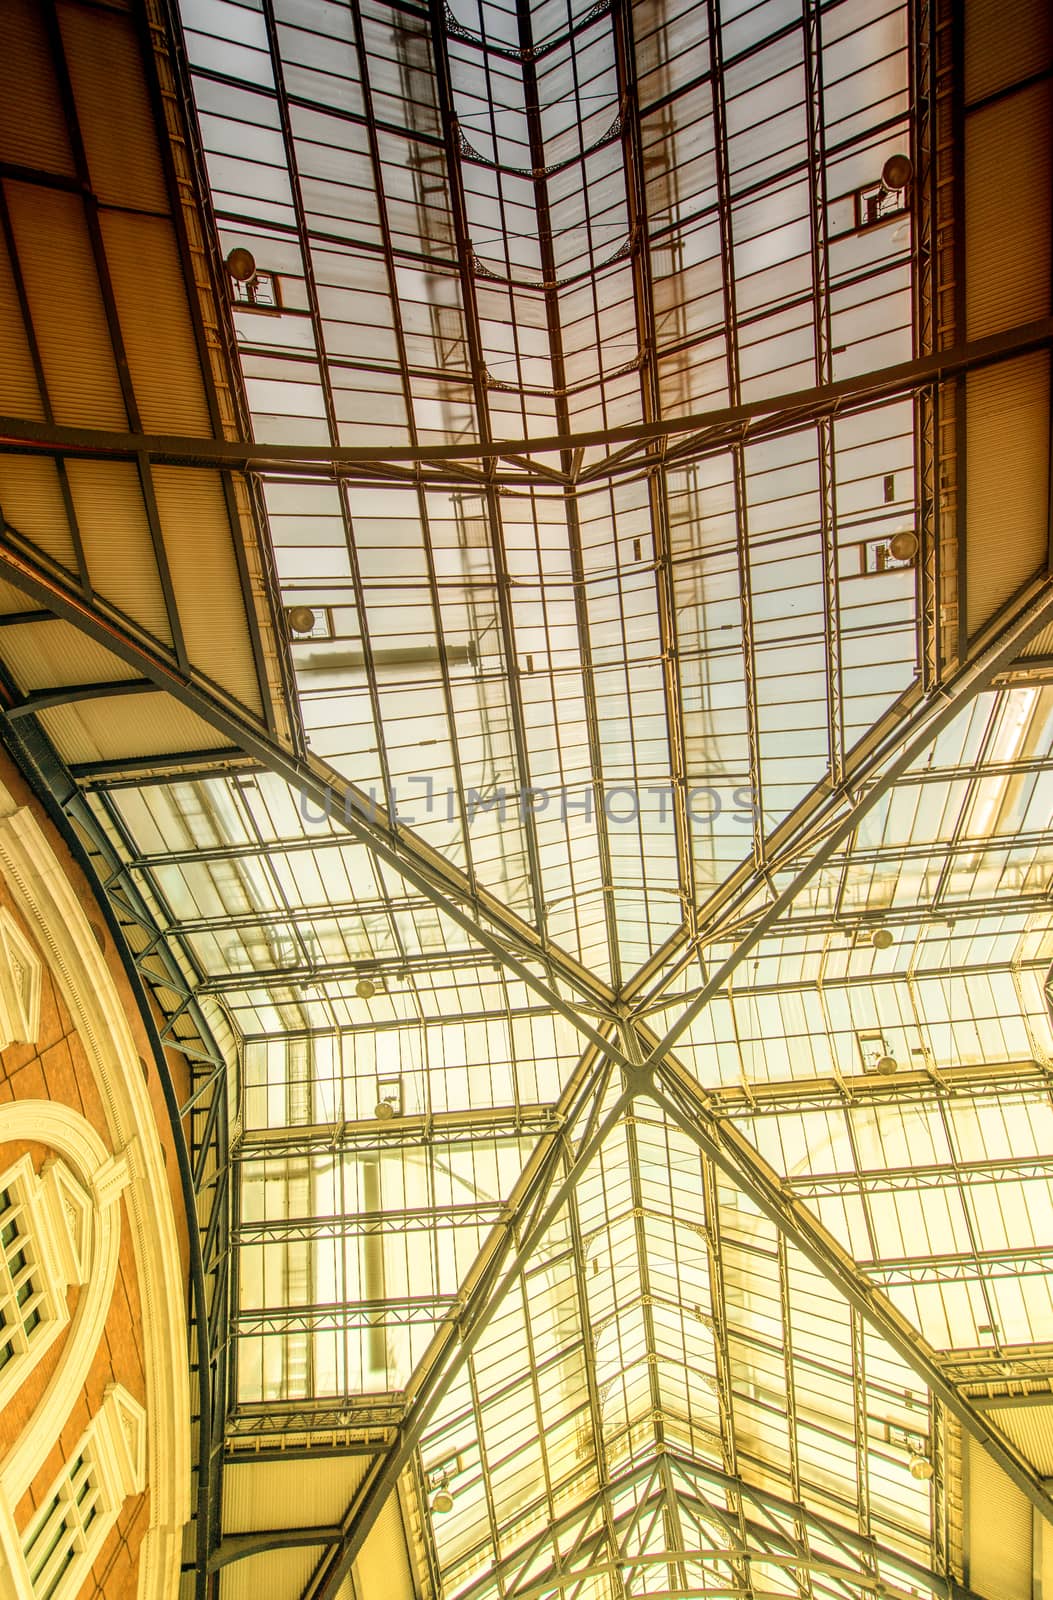 LONDON - SEPTEMBER 27, 2013: Liverpool Street station roof glass. Since 1874,third busiest railway terminus after Waterloo, Victoria, serves 25 million passengers per year.